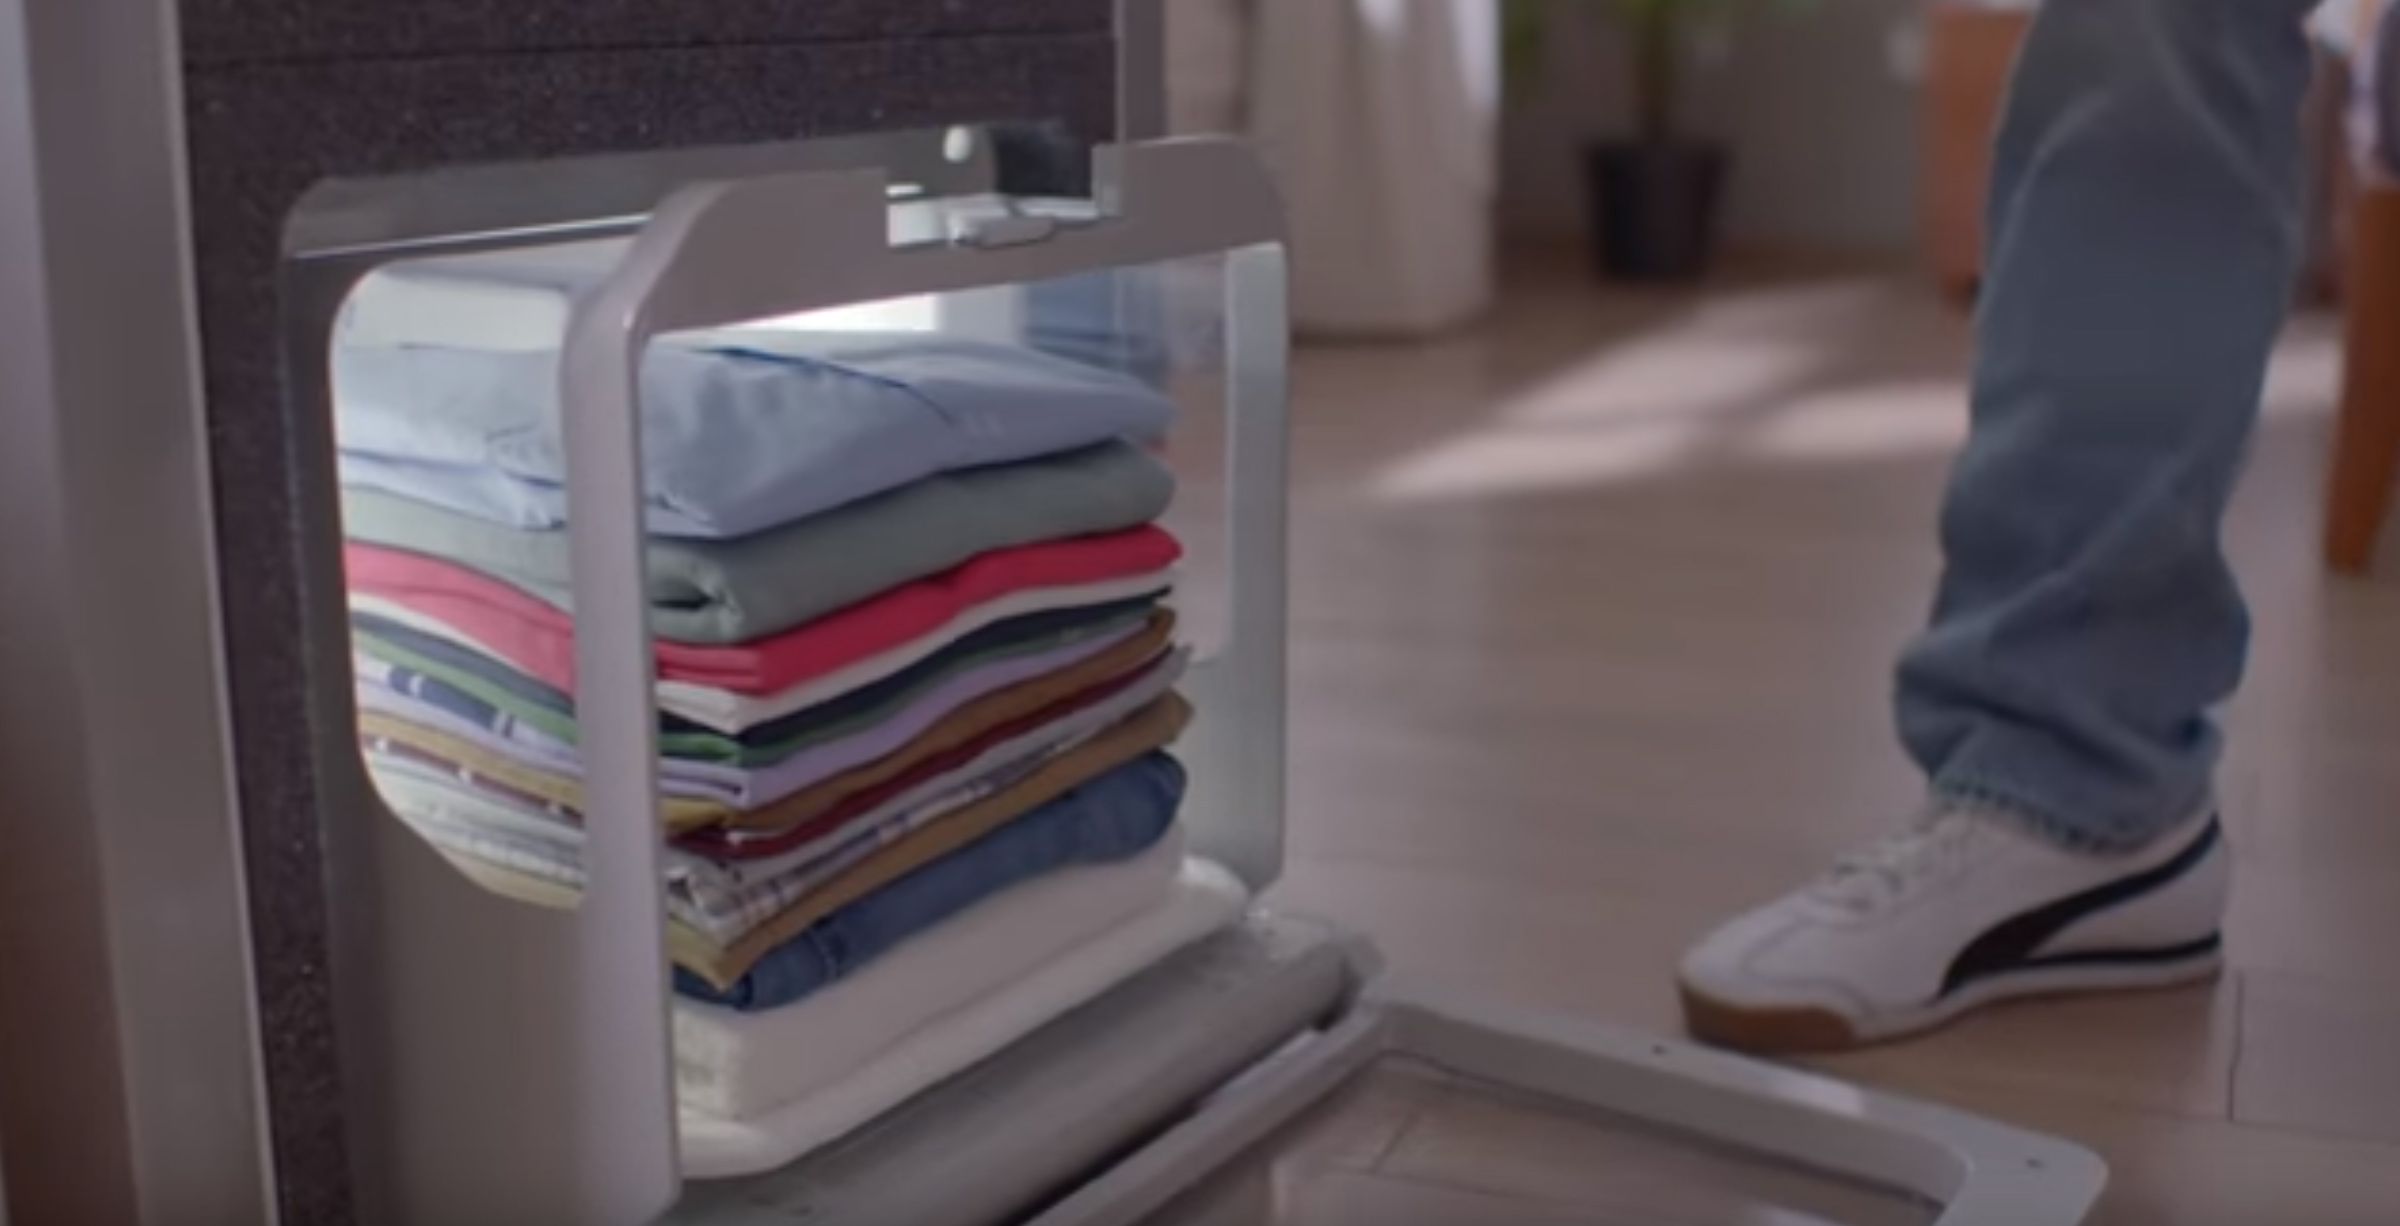 FoldiMate is a robot that folds all your clothing